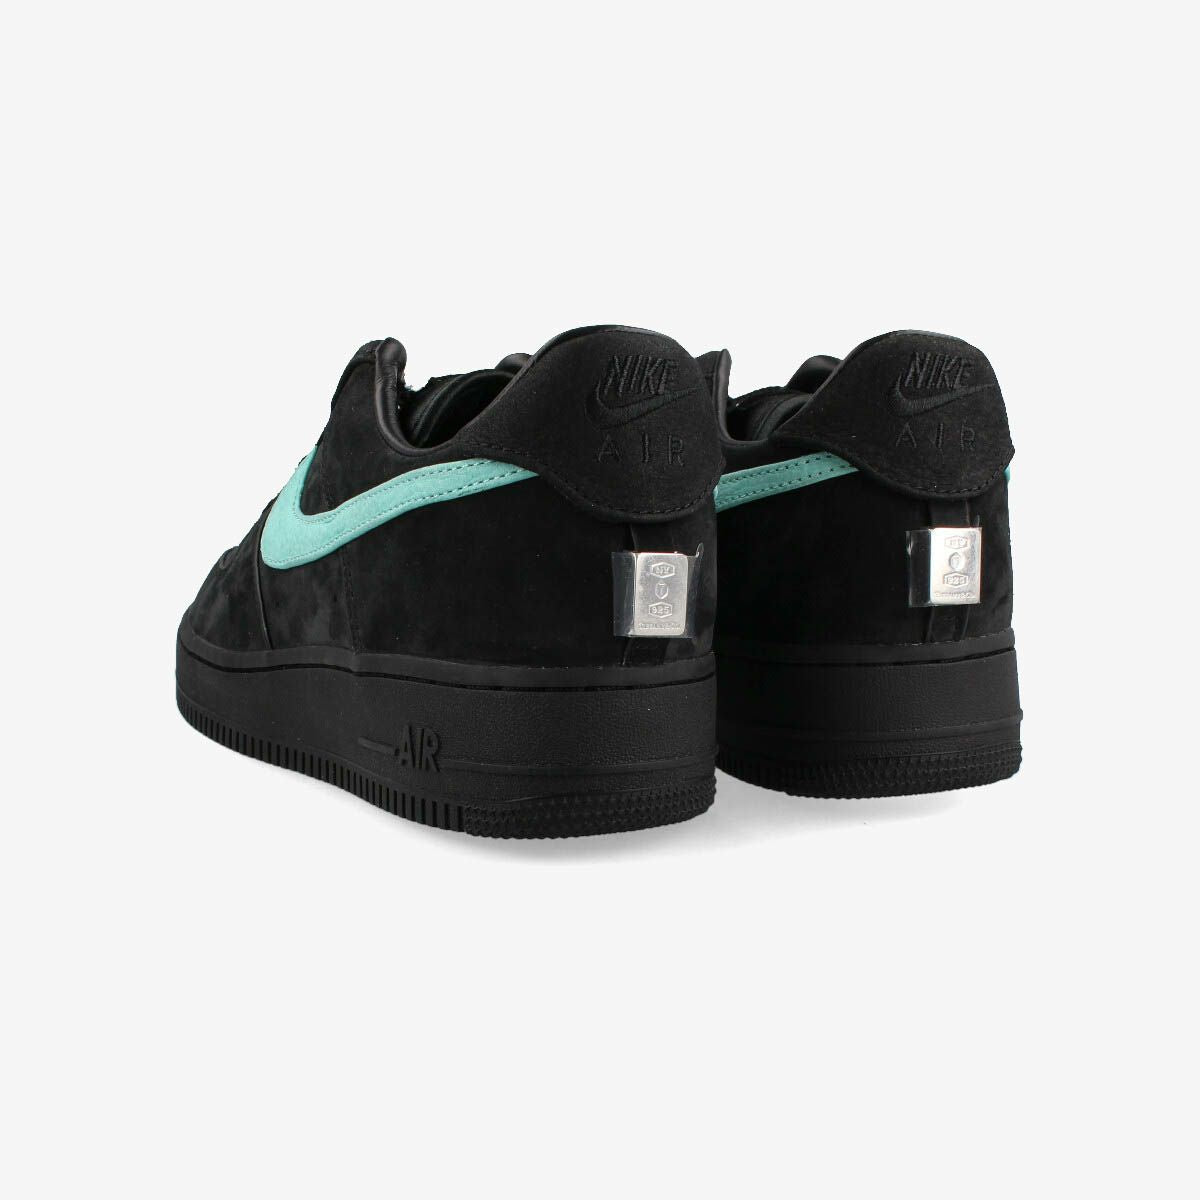 NIKE AIR FORCE 1 LOW 1837 BLACK/MULTI COLOR 【TIFFANY & CO.】